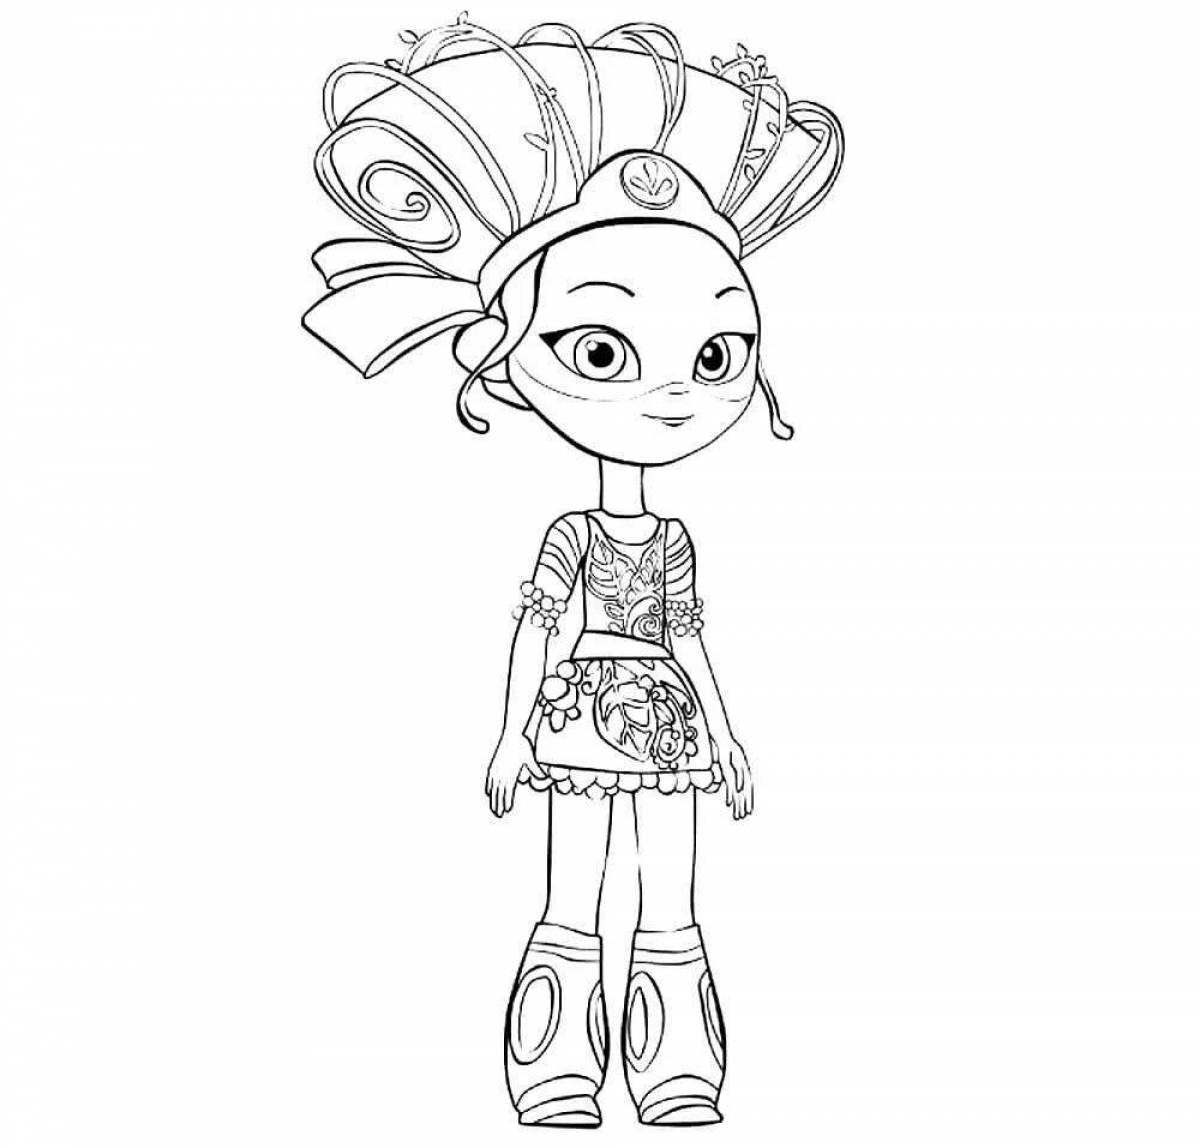 Coloring page serene fairy patrol